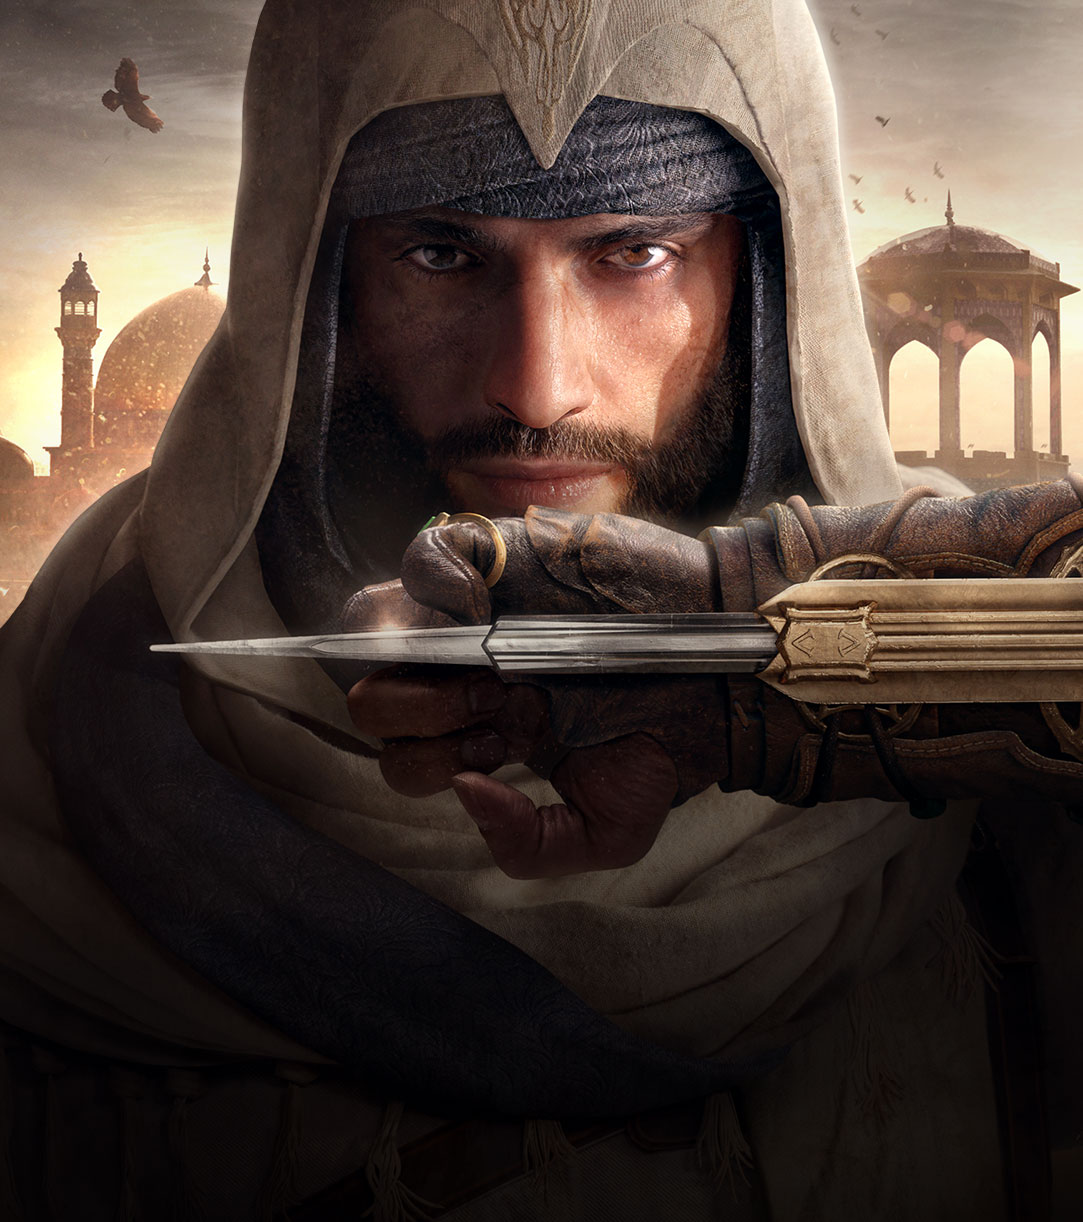 Assassin's Creed Revelations: SP Preview - In Search of Hidden Truths